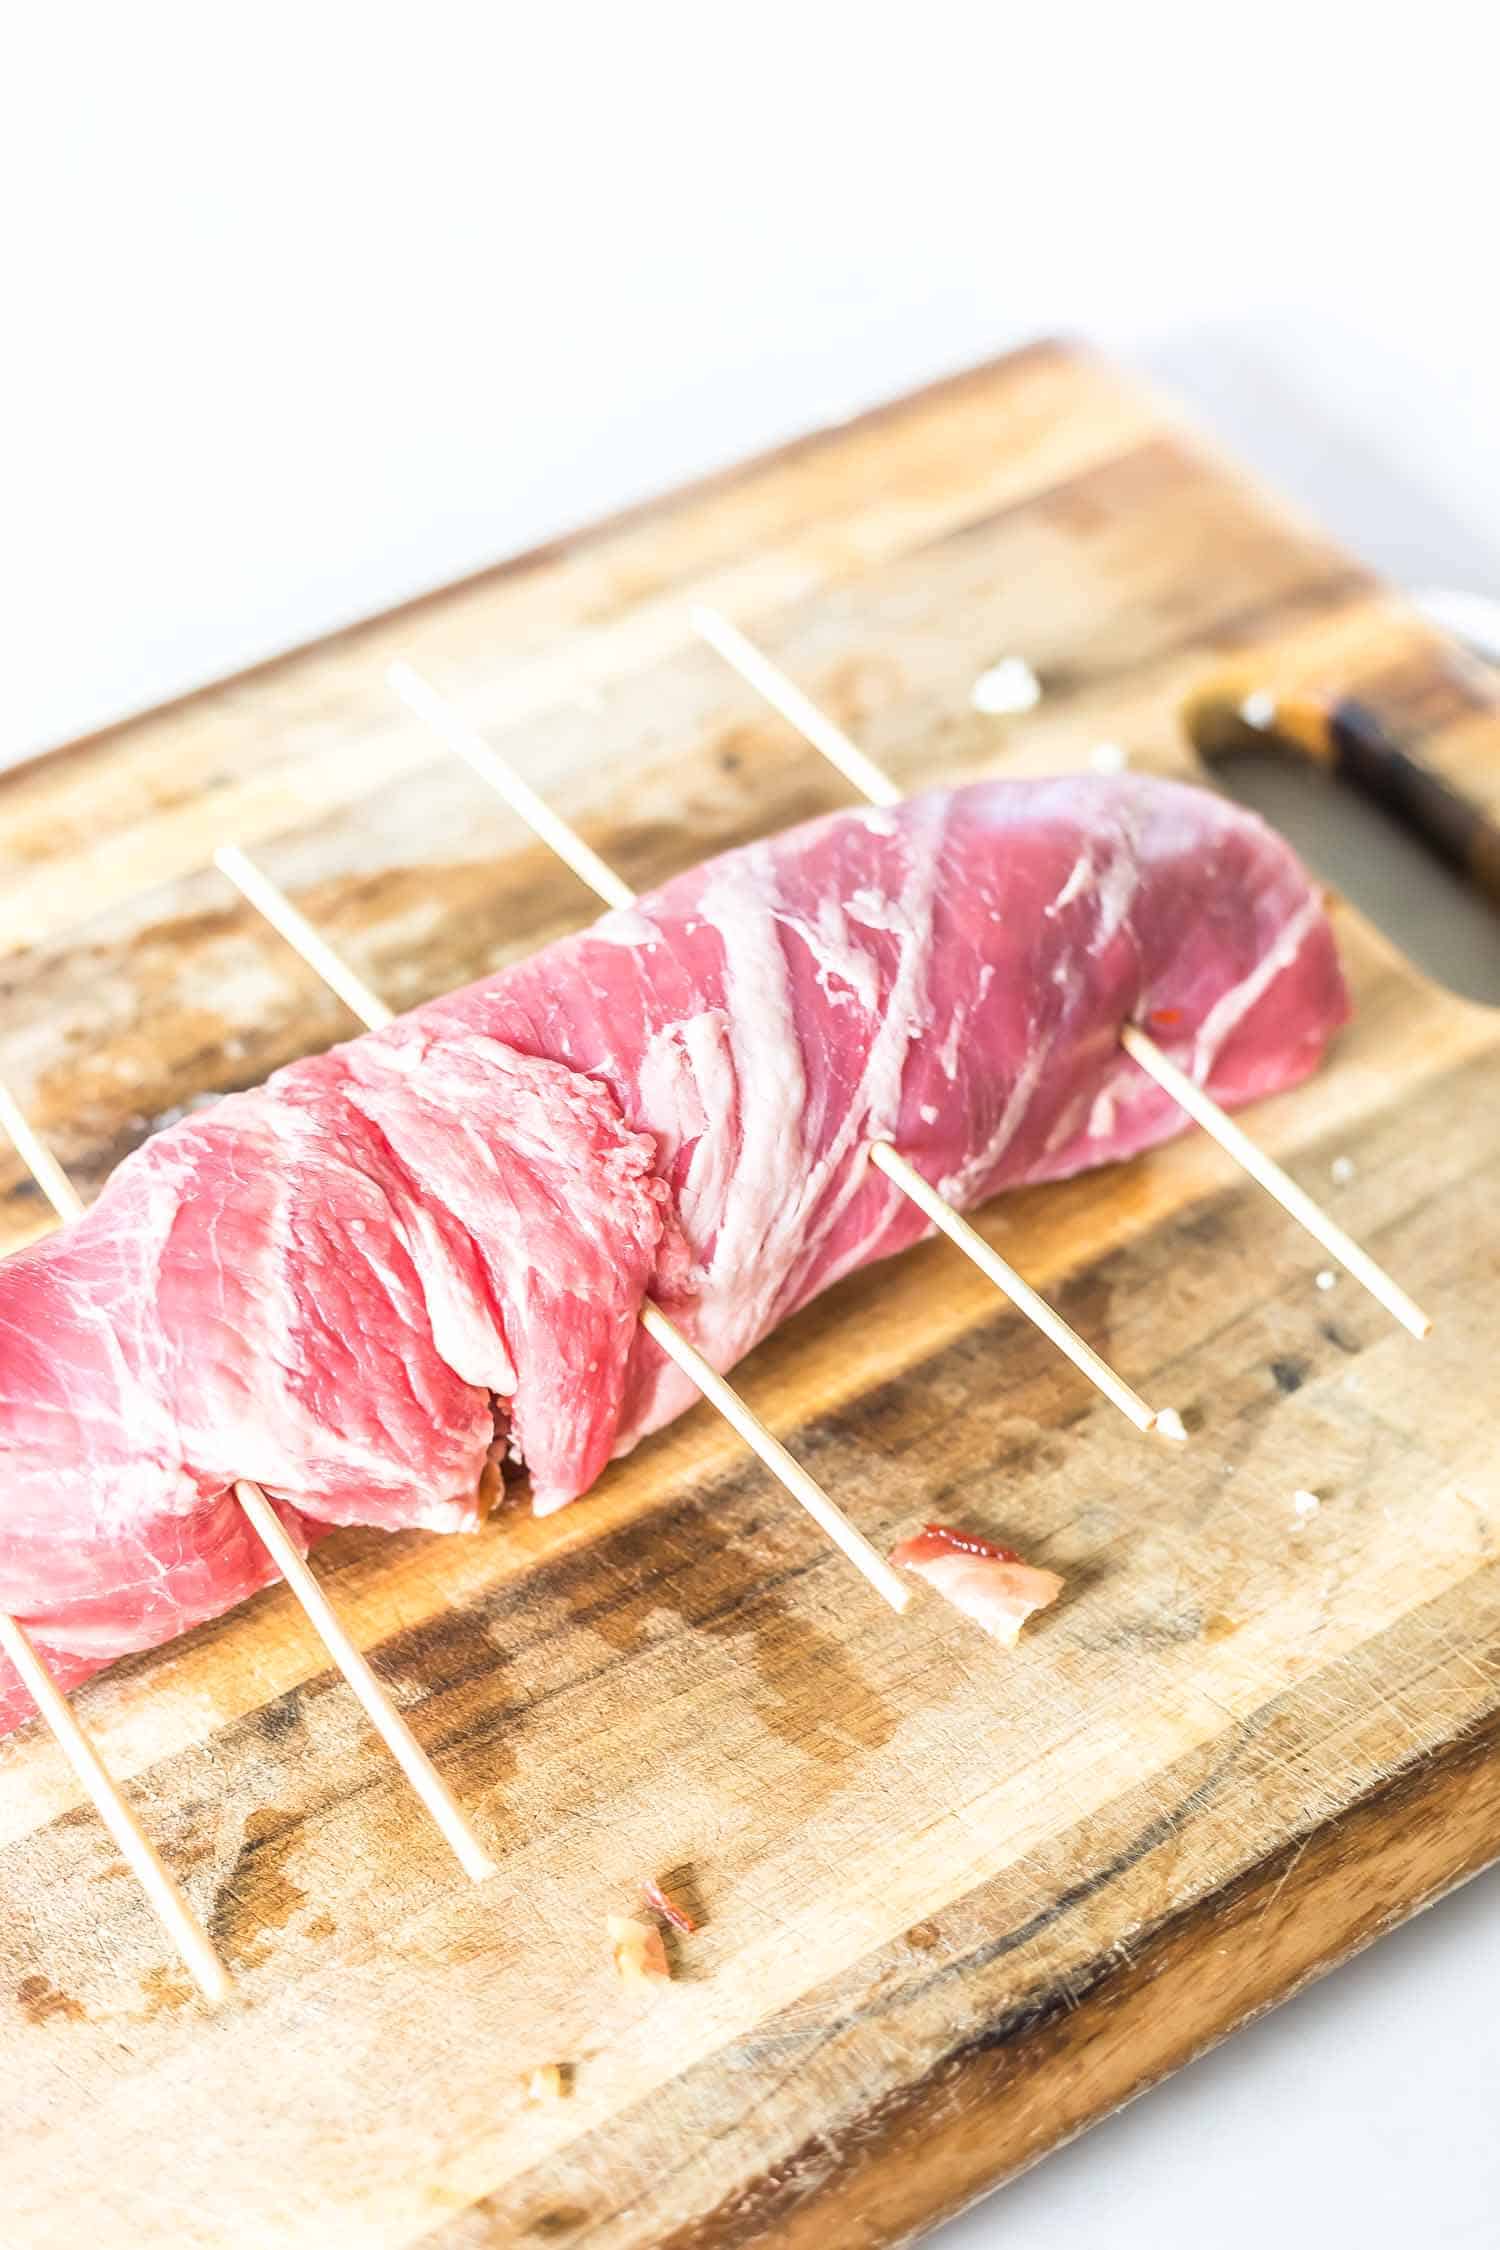 flank steak stuffed with blue cheese, bacon, and caramelized onions rolled up and skewered